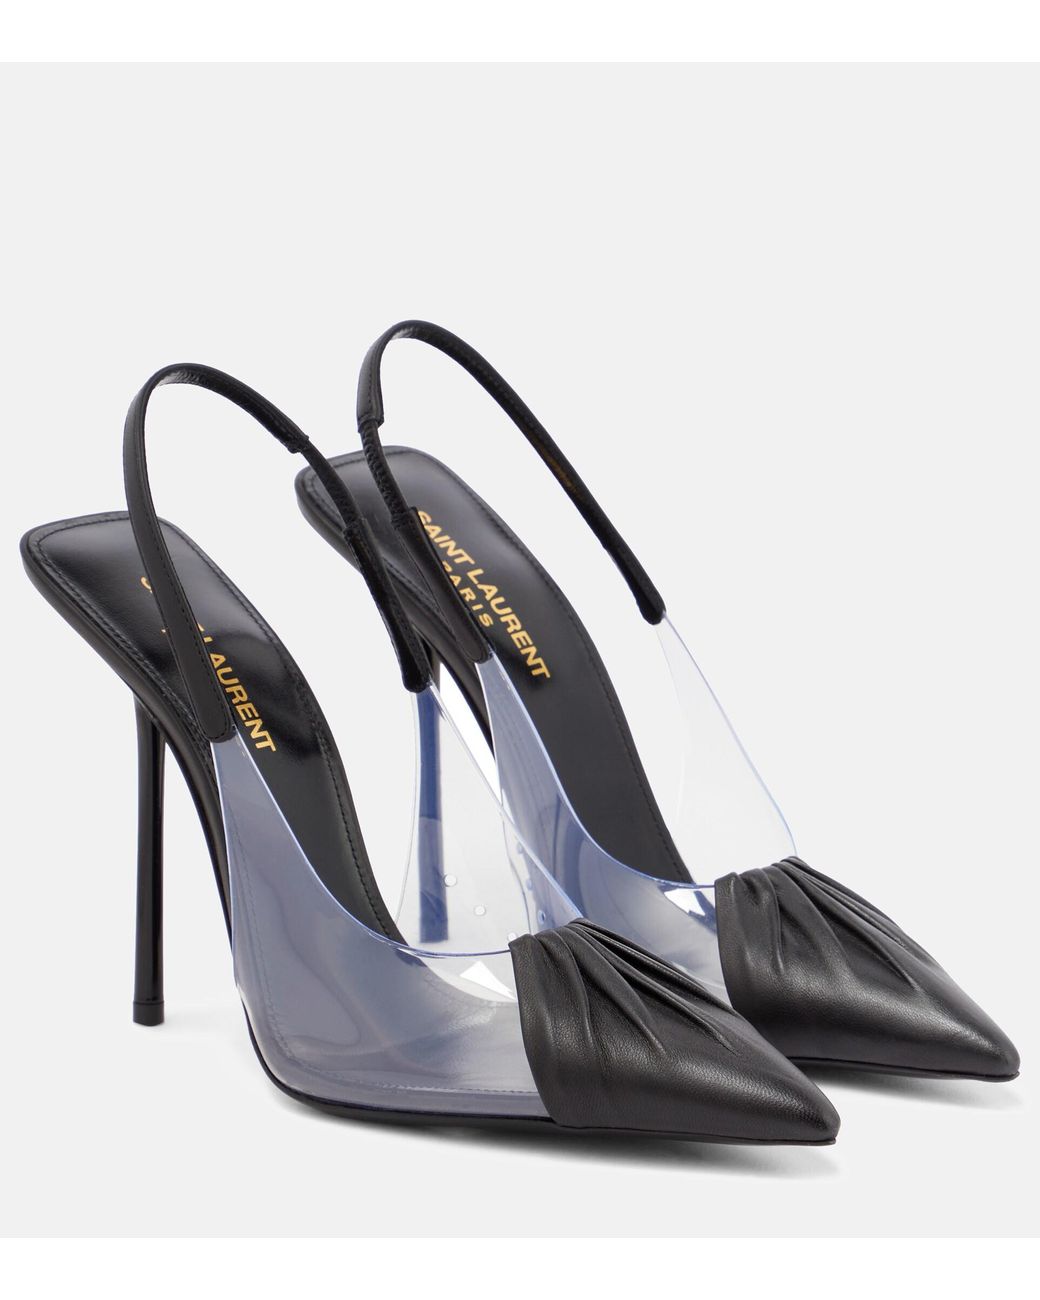 Saint Laurent Chica 115 Pvc And Leather Pumps in Black